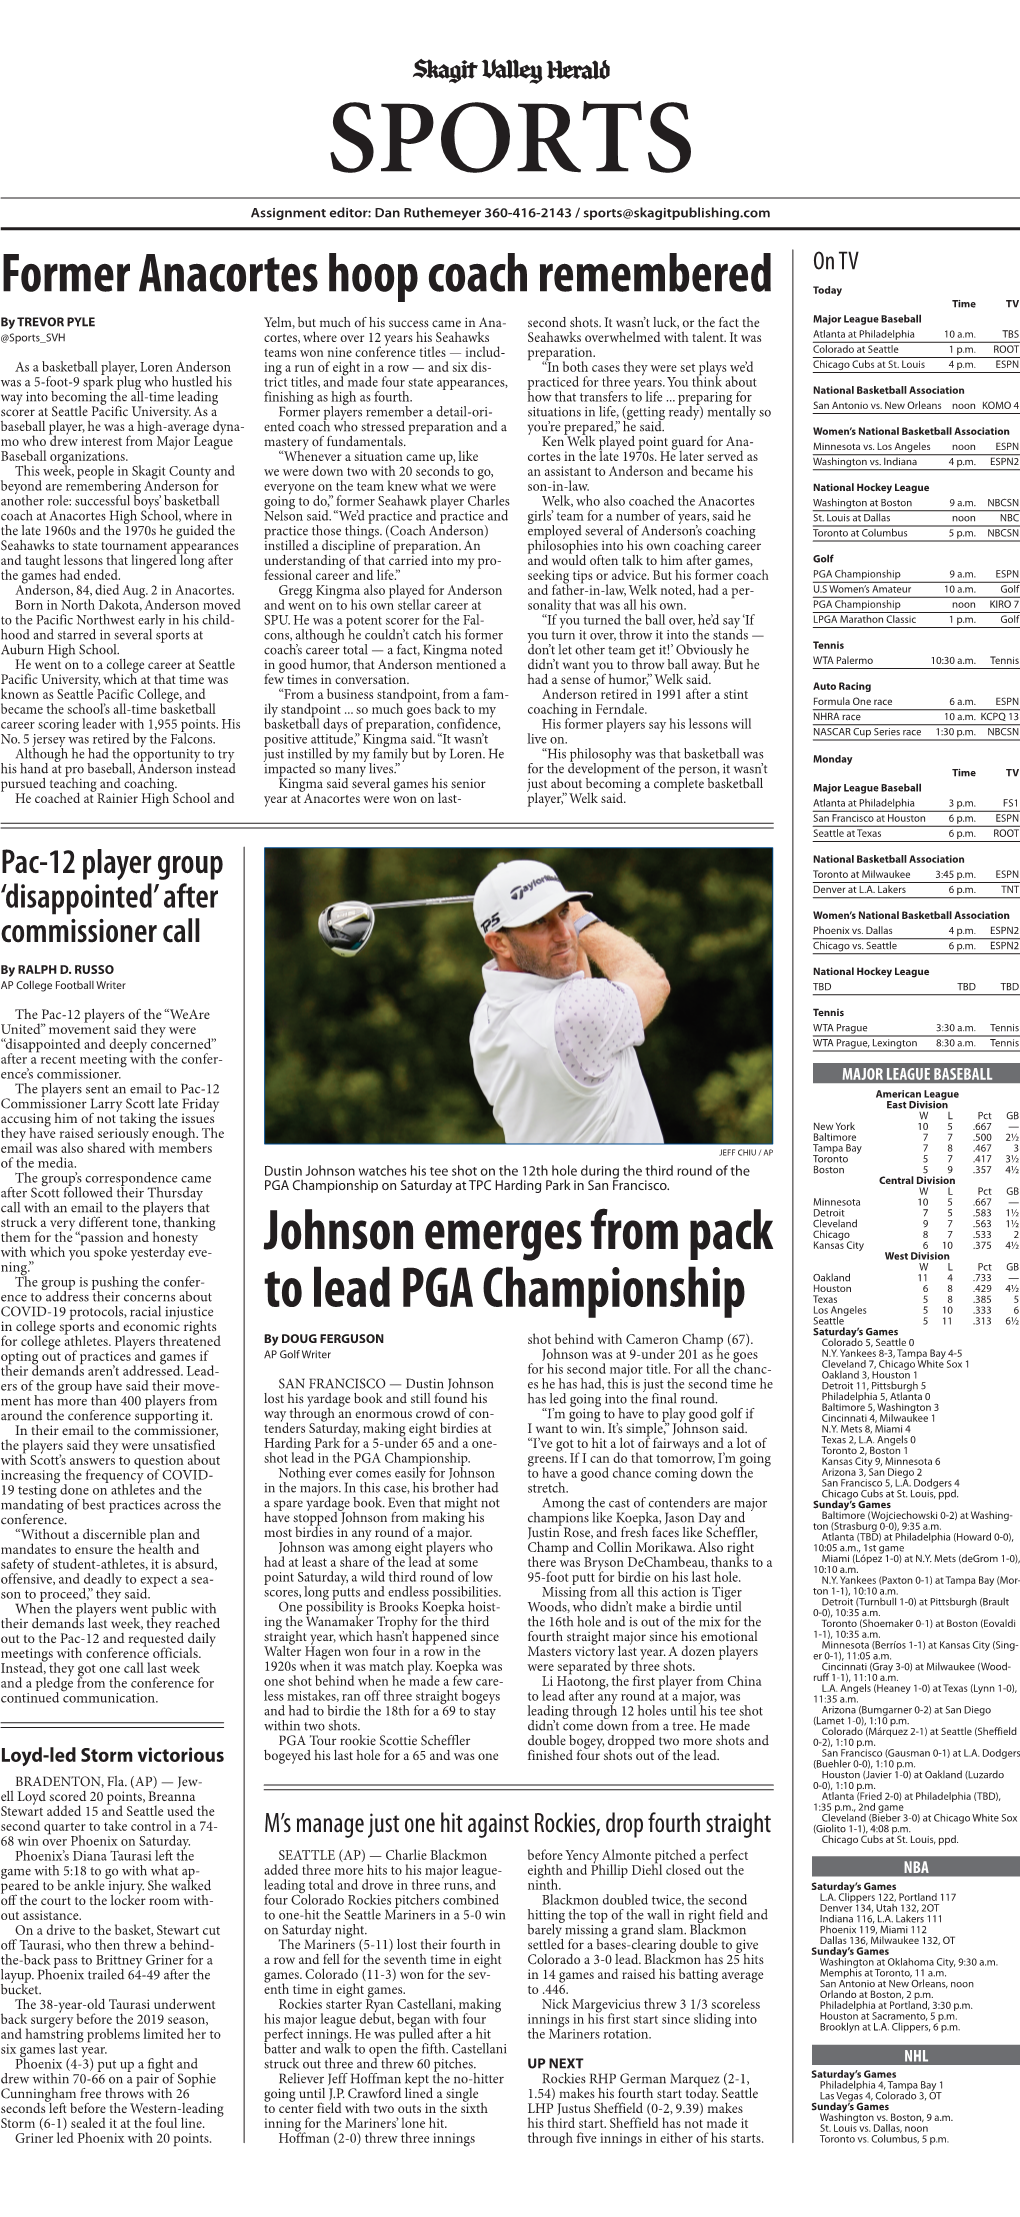 Johnson Emerges from Pack to Lead PGA